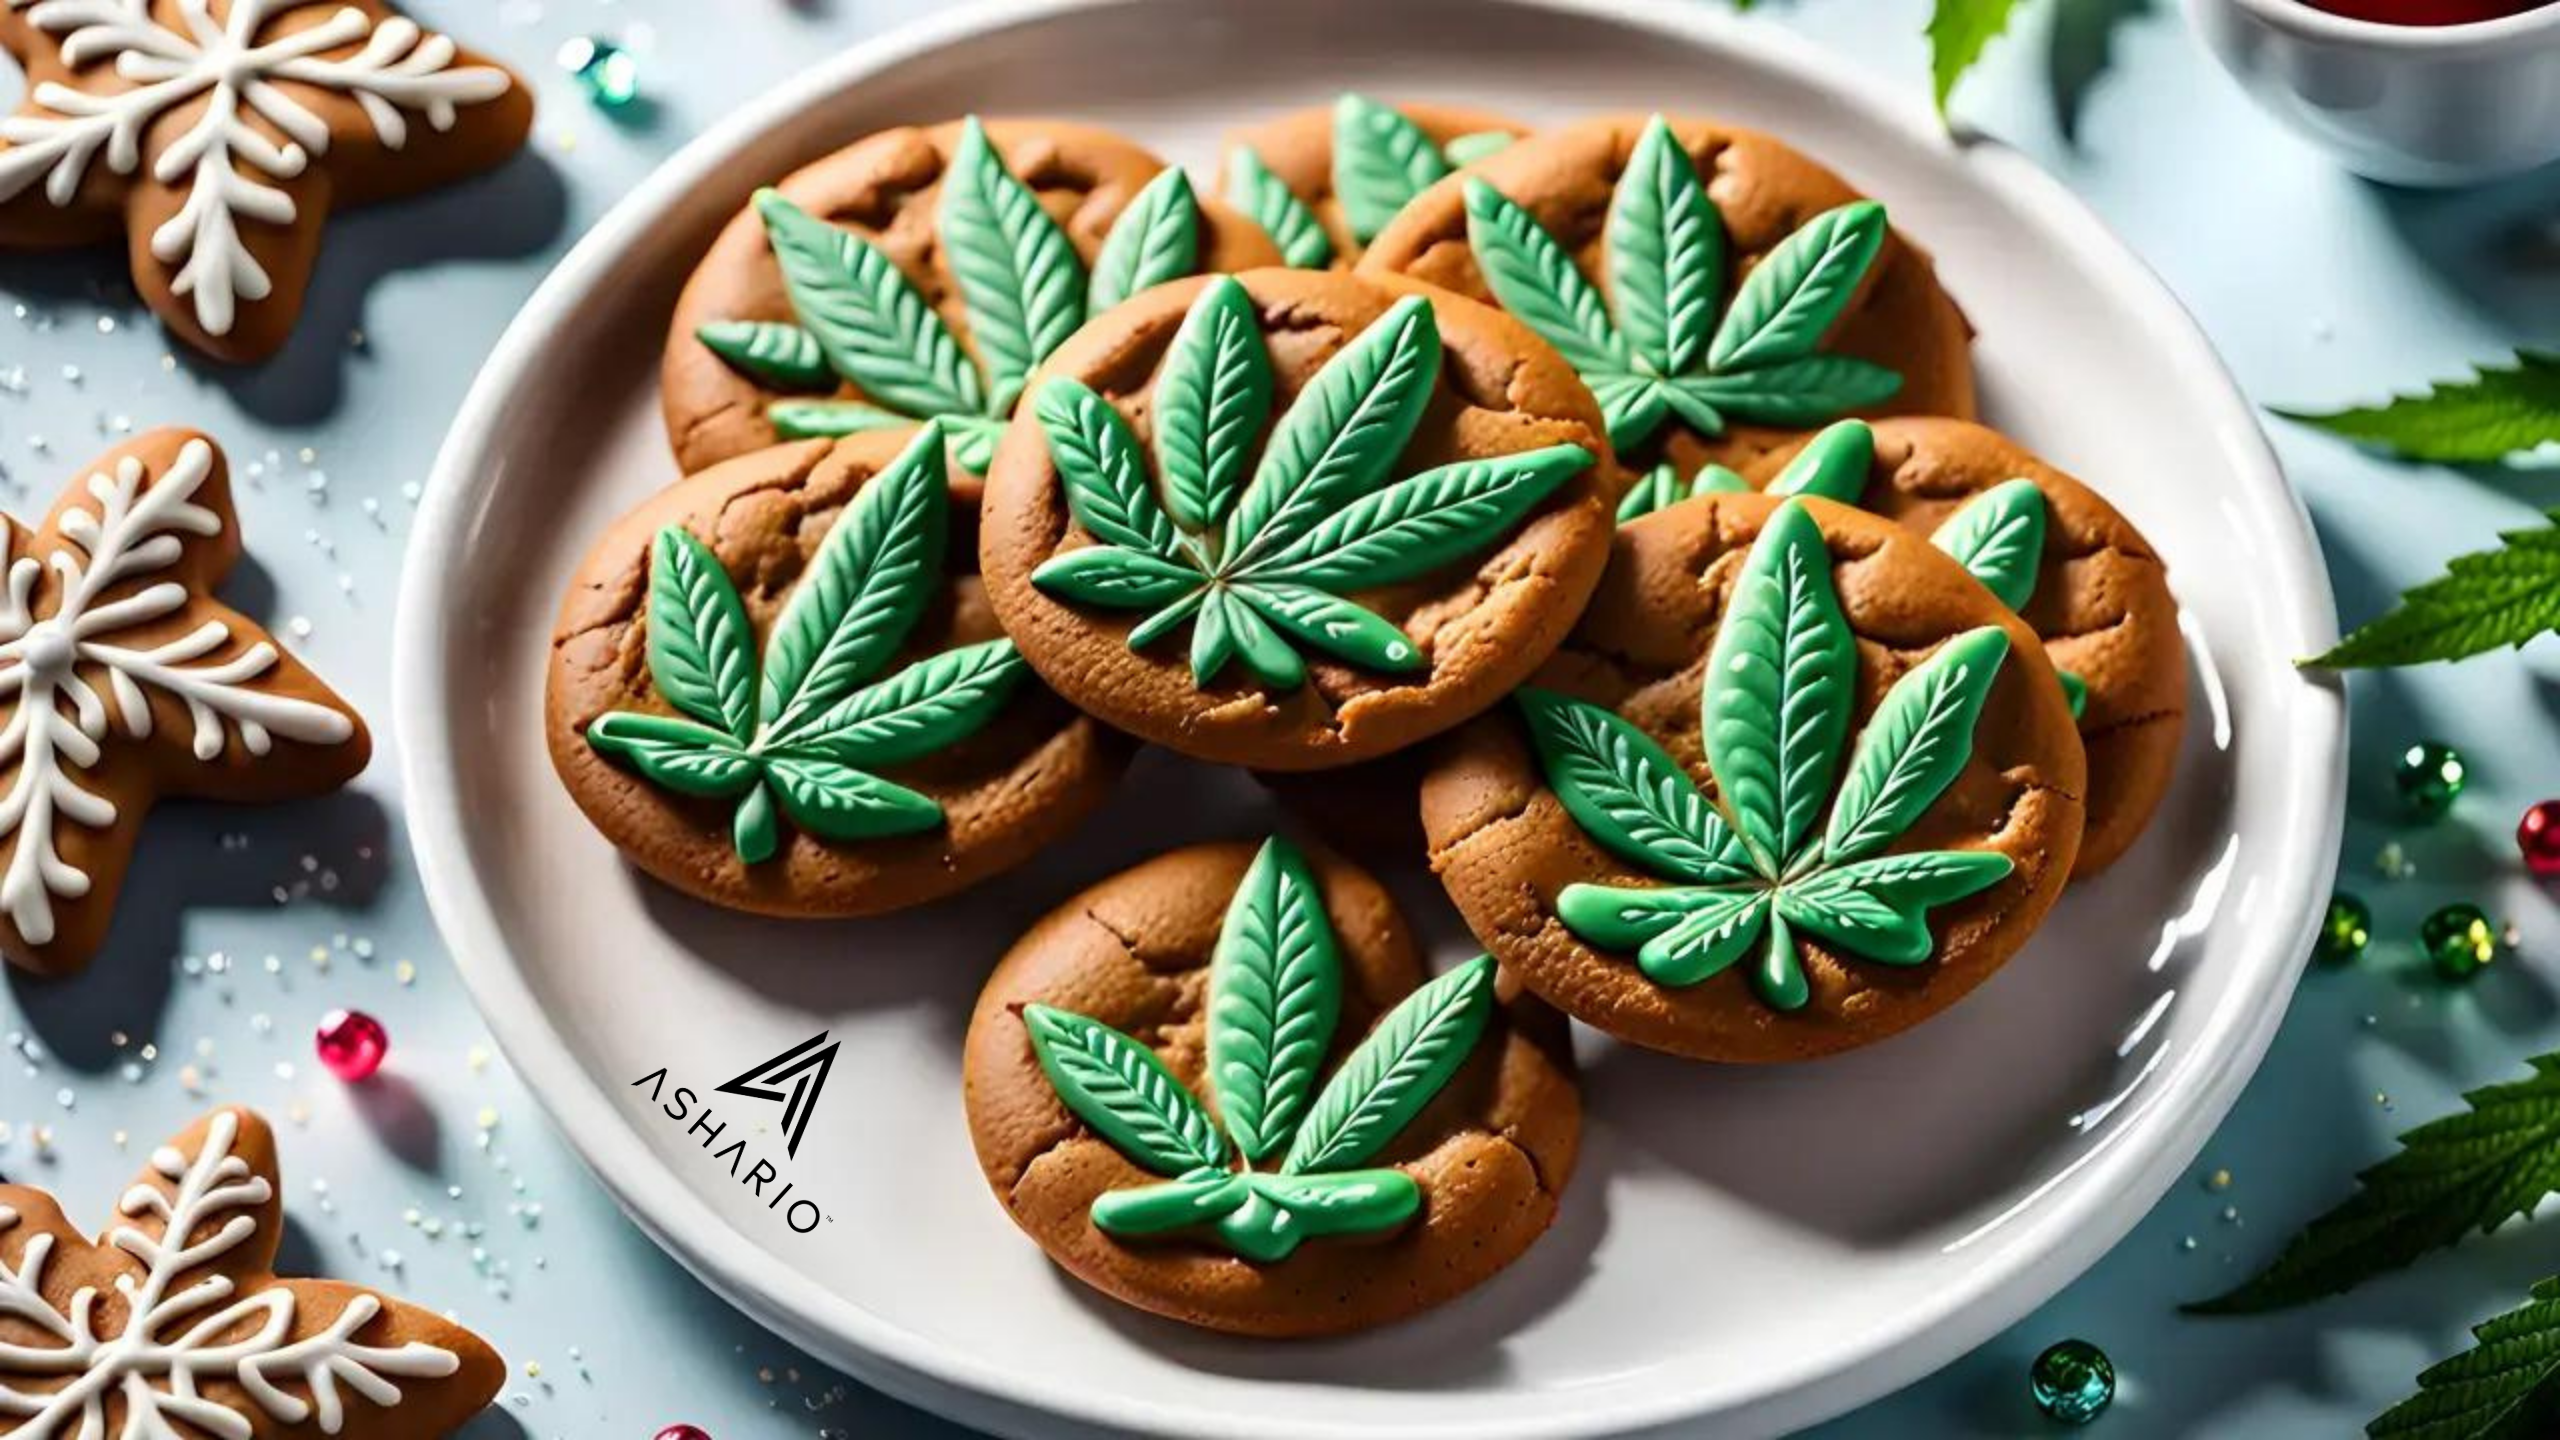 Celebrate the holiday season with Ashario Cannabis's delightful recipe for Cannabis Gingerbread. Dive into the festive spirit with this flavorful treat infused with cannabis goodness.